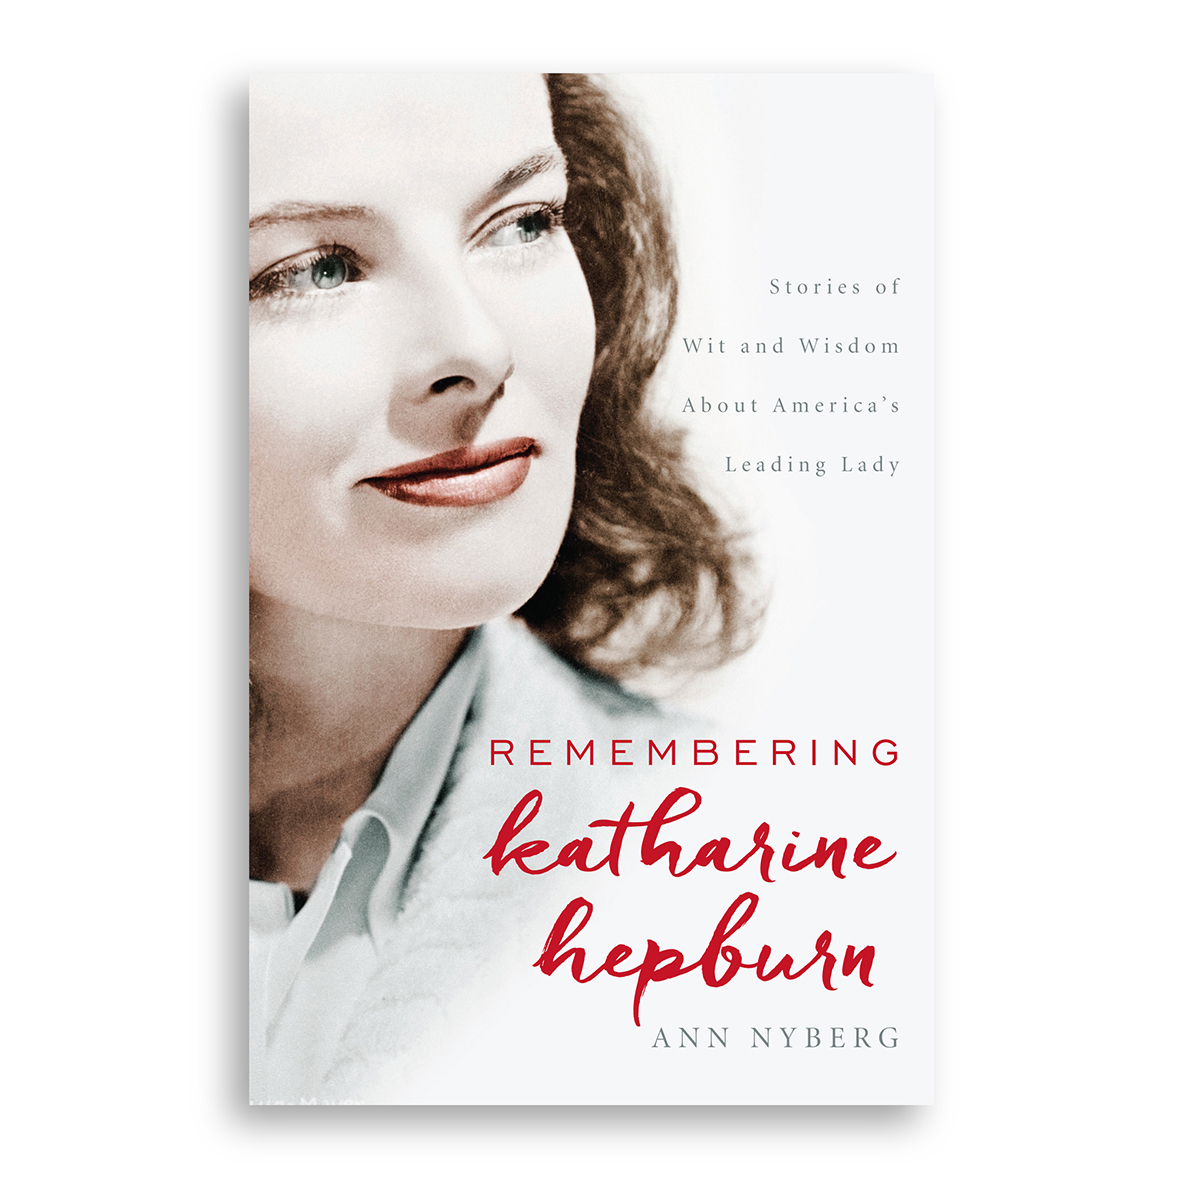 Image of the front cover of the book, Remembering Katharine Hepburn: Stories of Wit and Wisdom About American's Leading Lady, by Ann Nyberg, cover design by Jen Huppert Design.